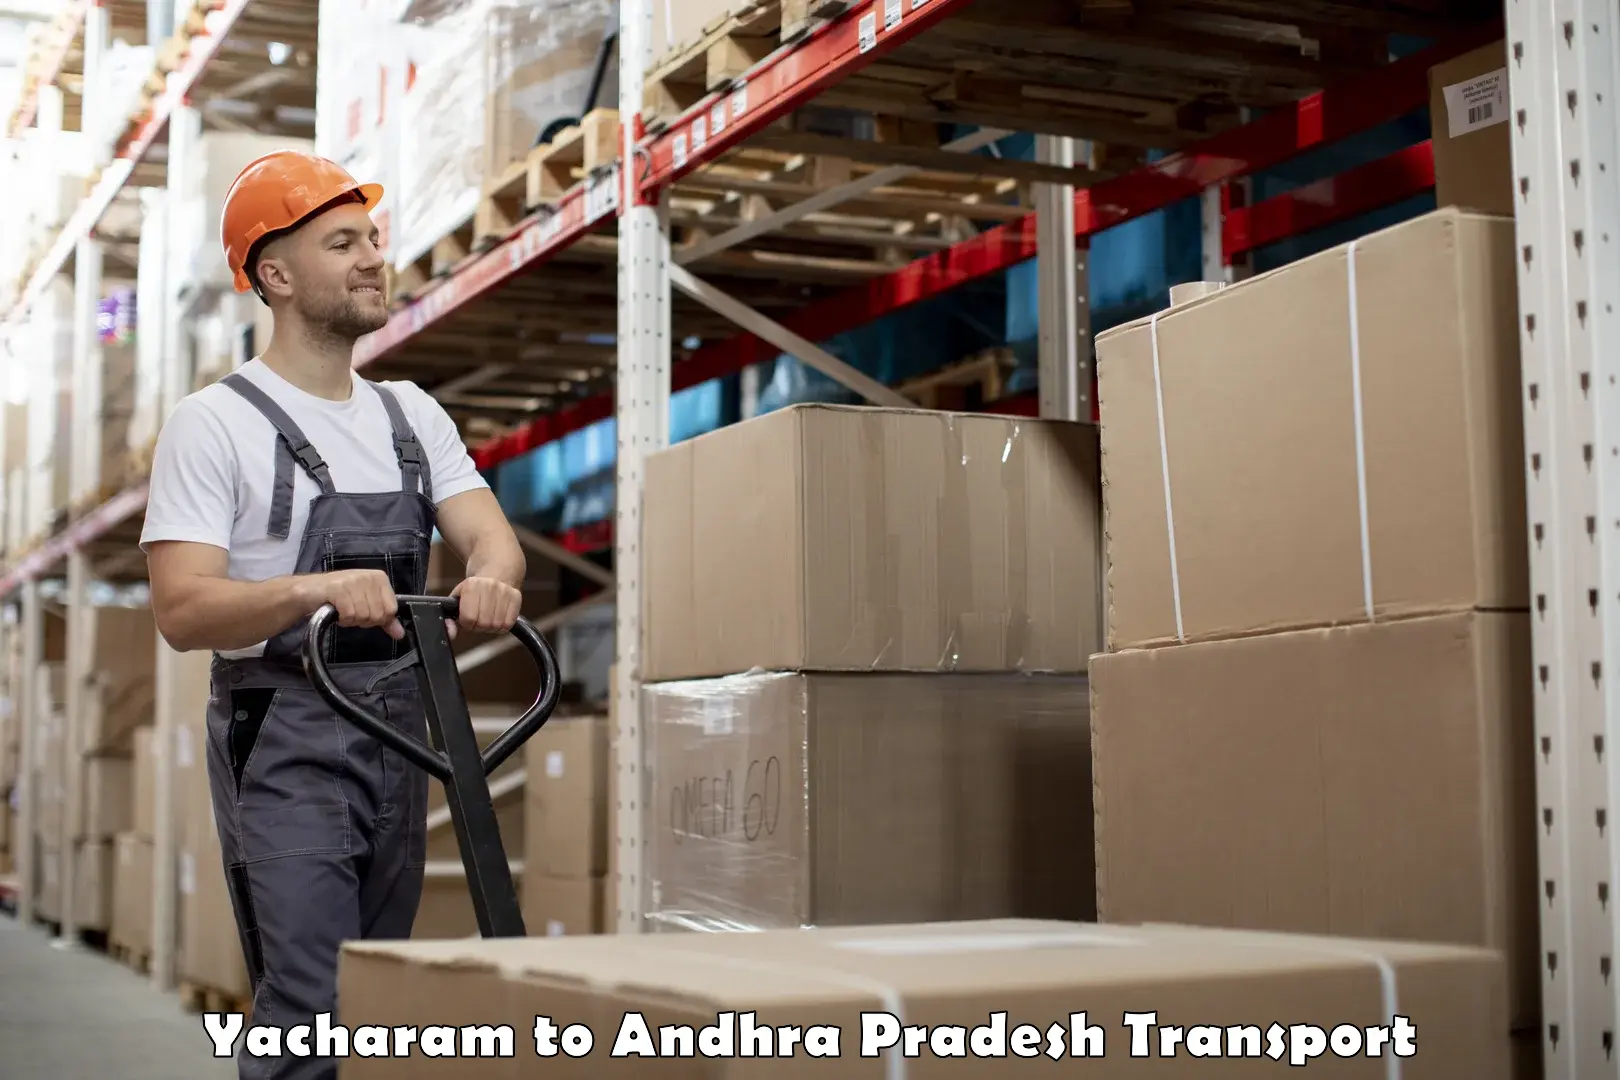 Truck transport companies in India in Yacharam to Waltair